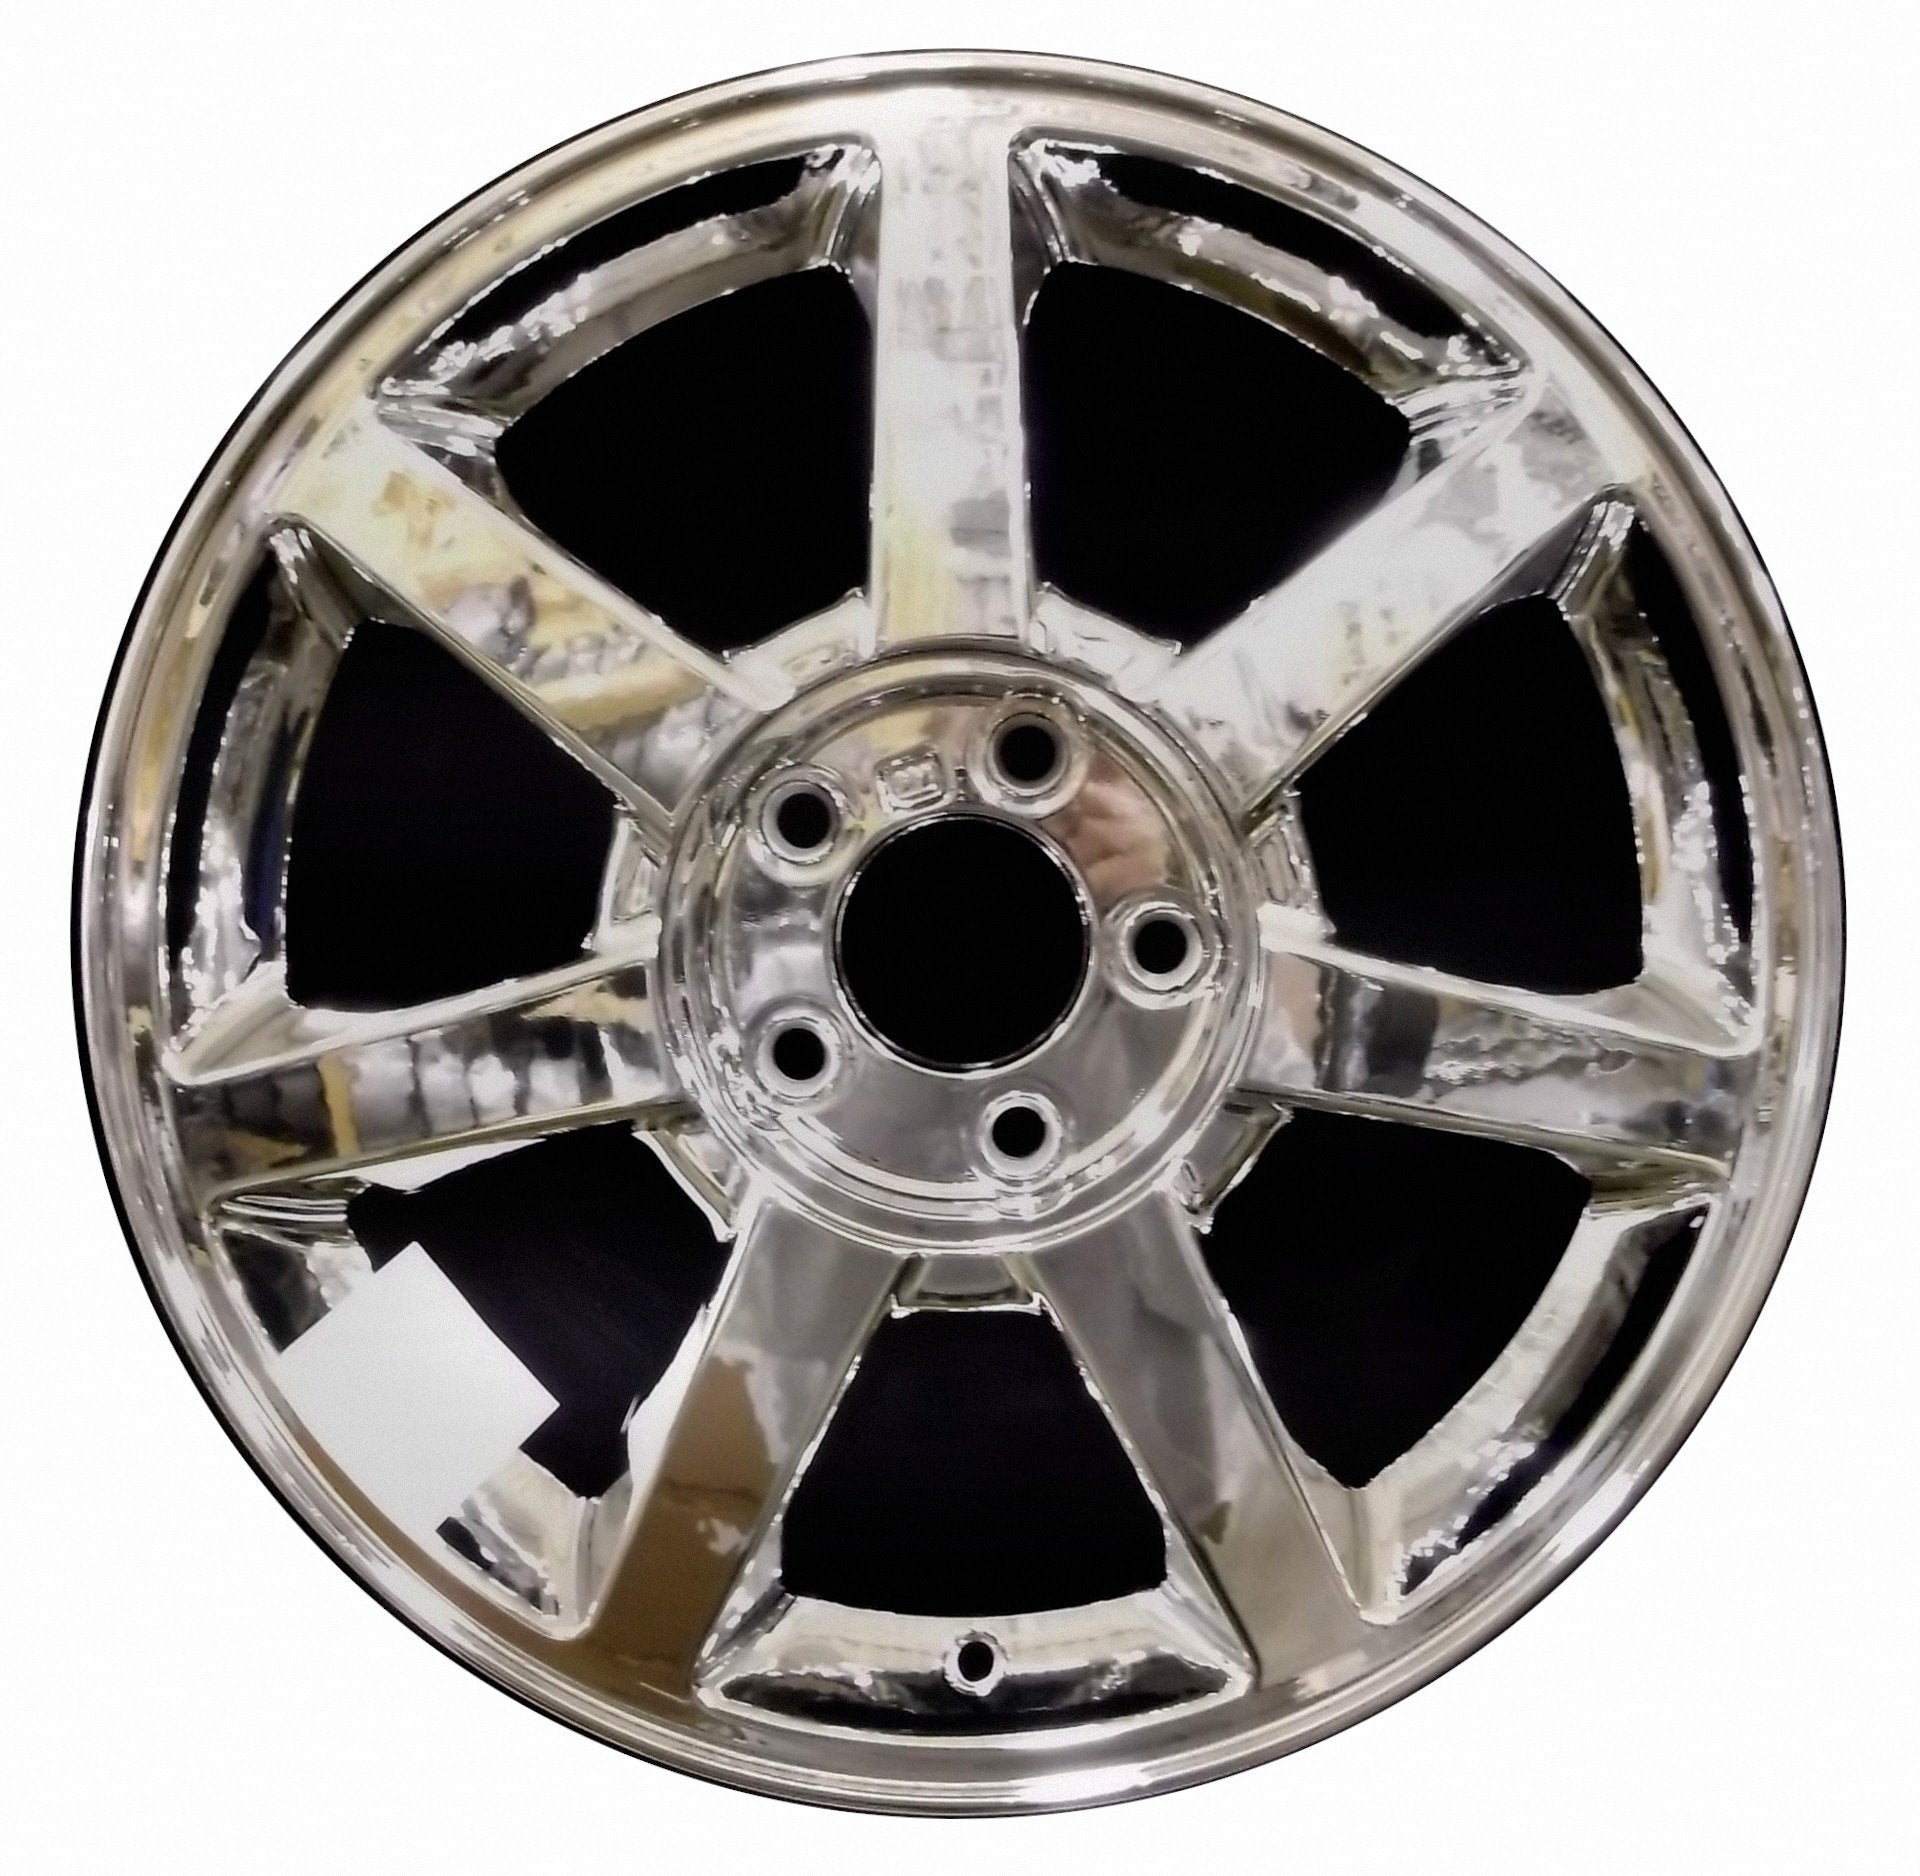 Cadillac CTS  2004, 2005, 2006, 2007, 2008, 2009 Factory OEM Car Wheel Size 17x7.5 Alloy WAO.4578FT.PVD1.FF